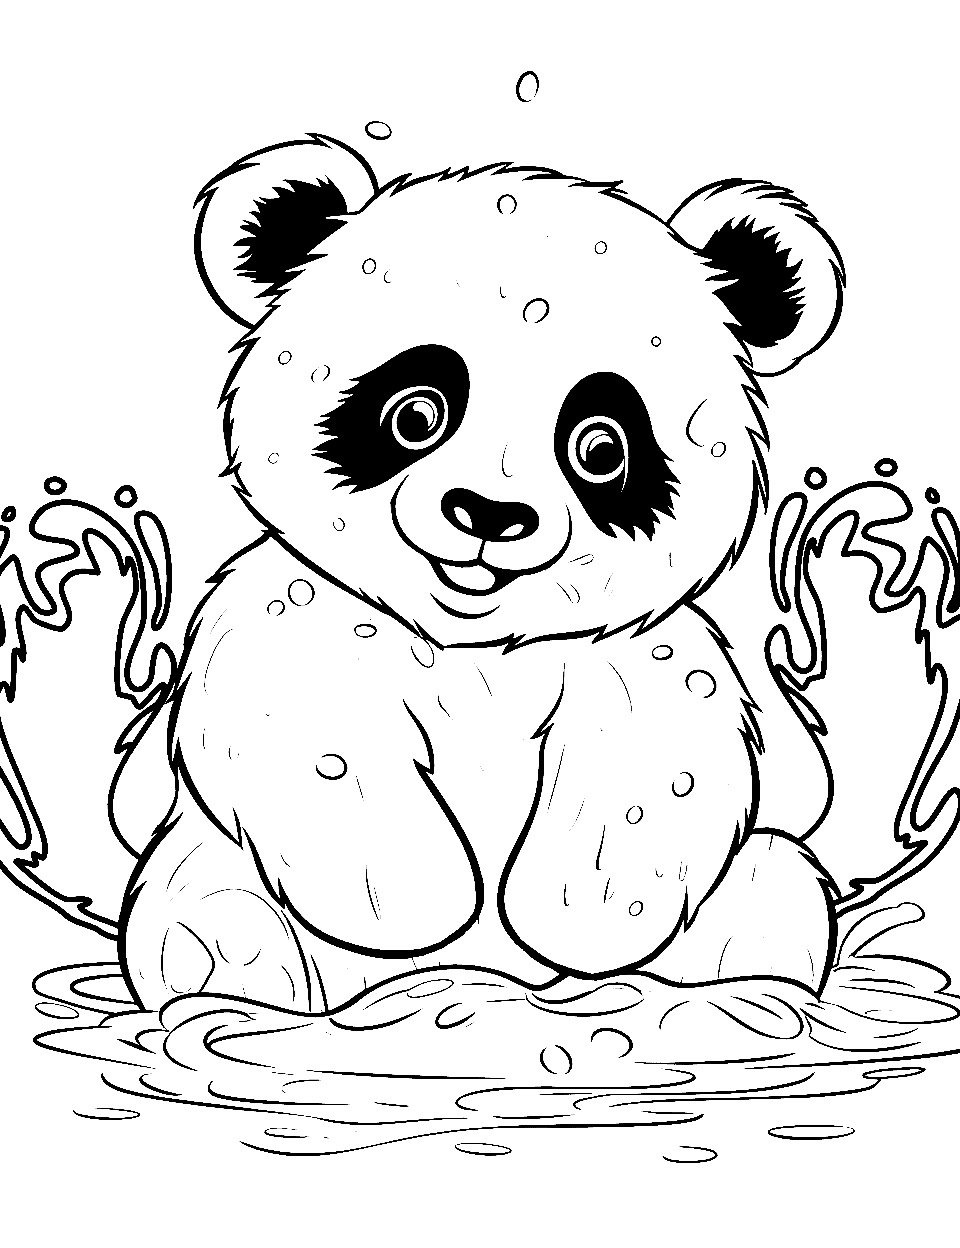 Playful Water Panda Coloring Page - A panda splashing with delight in a small puddle of water.